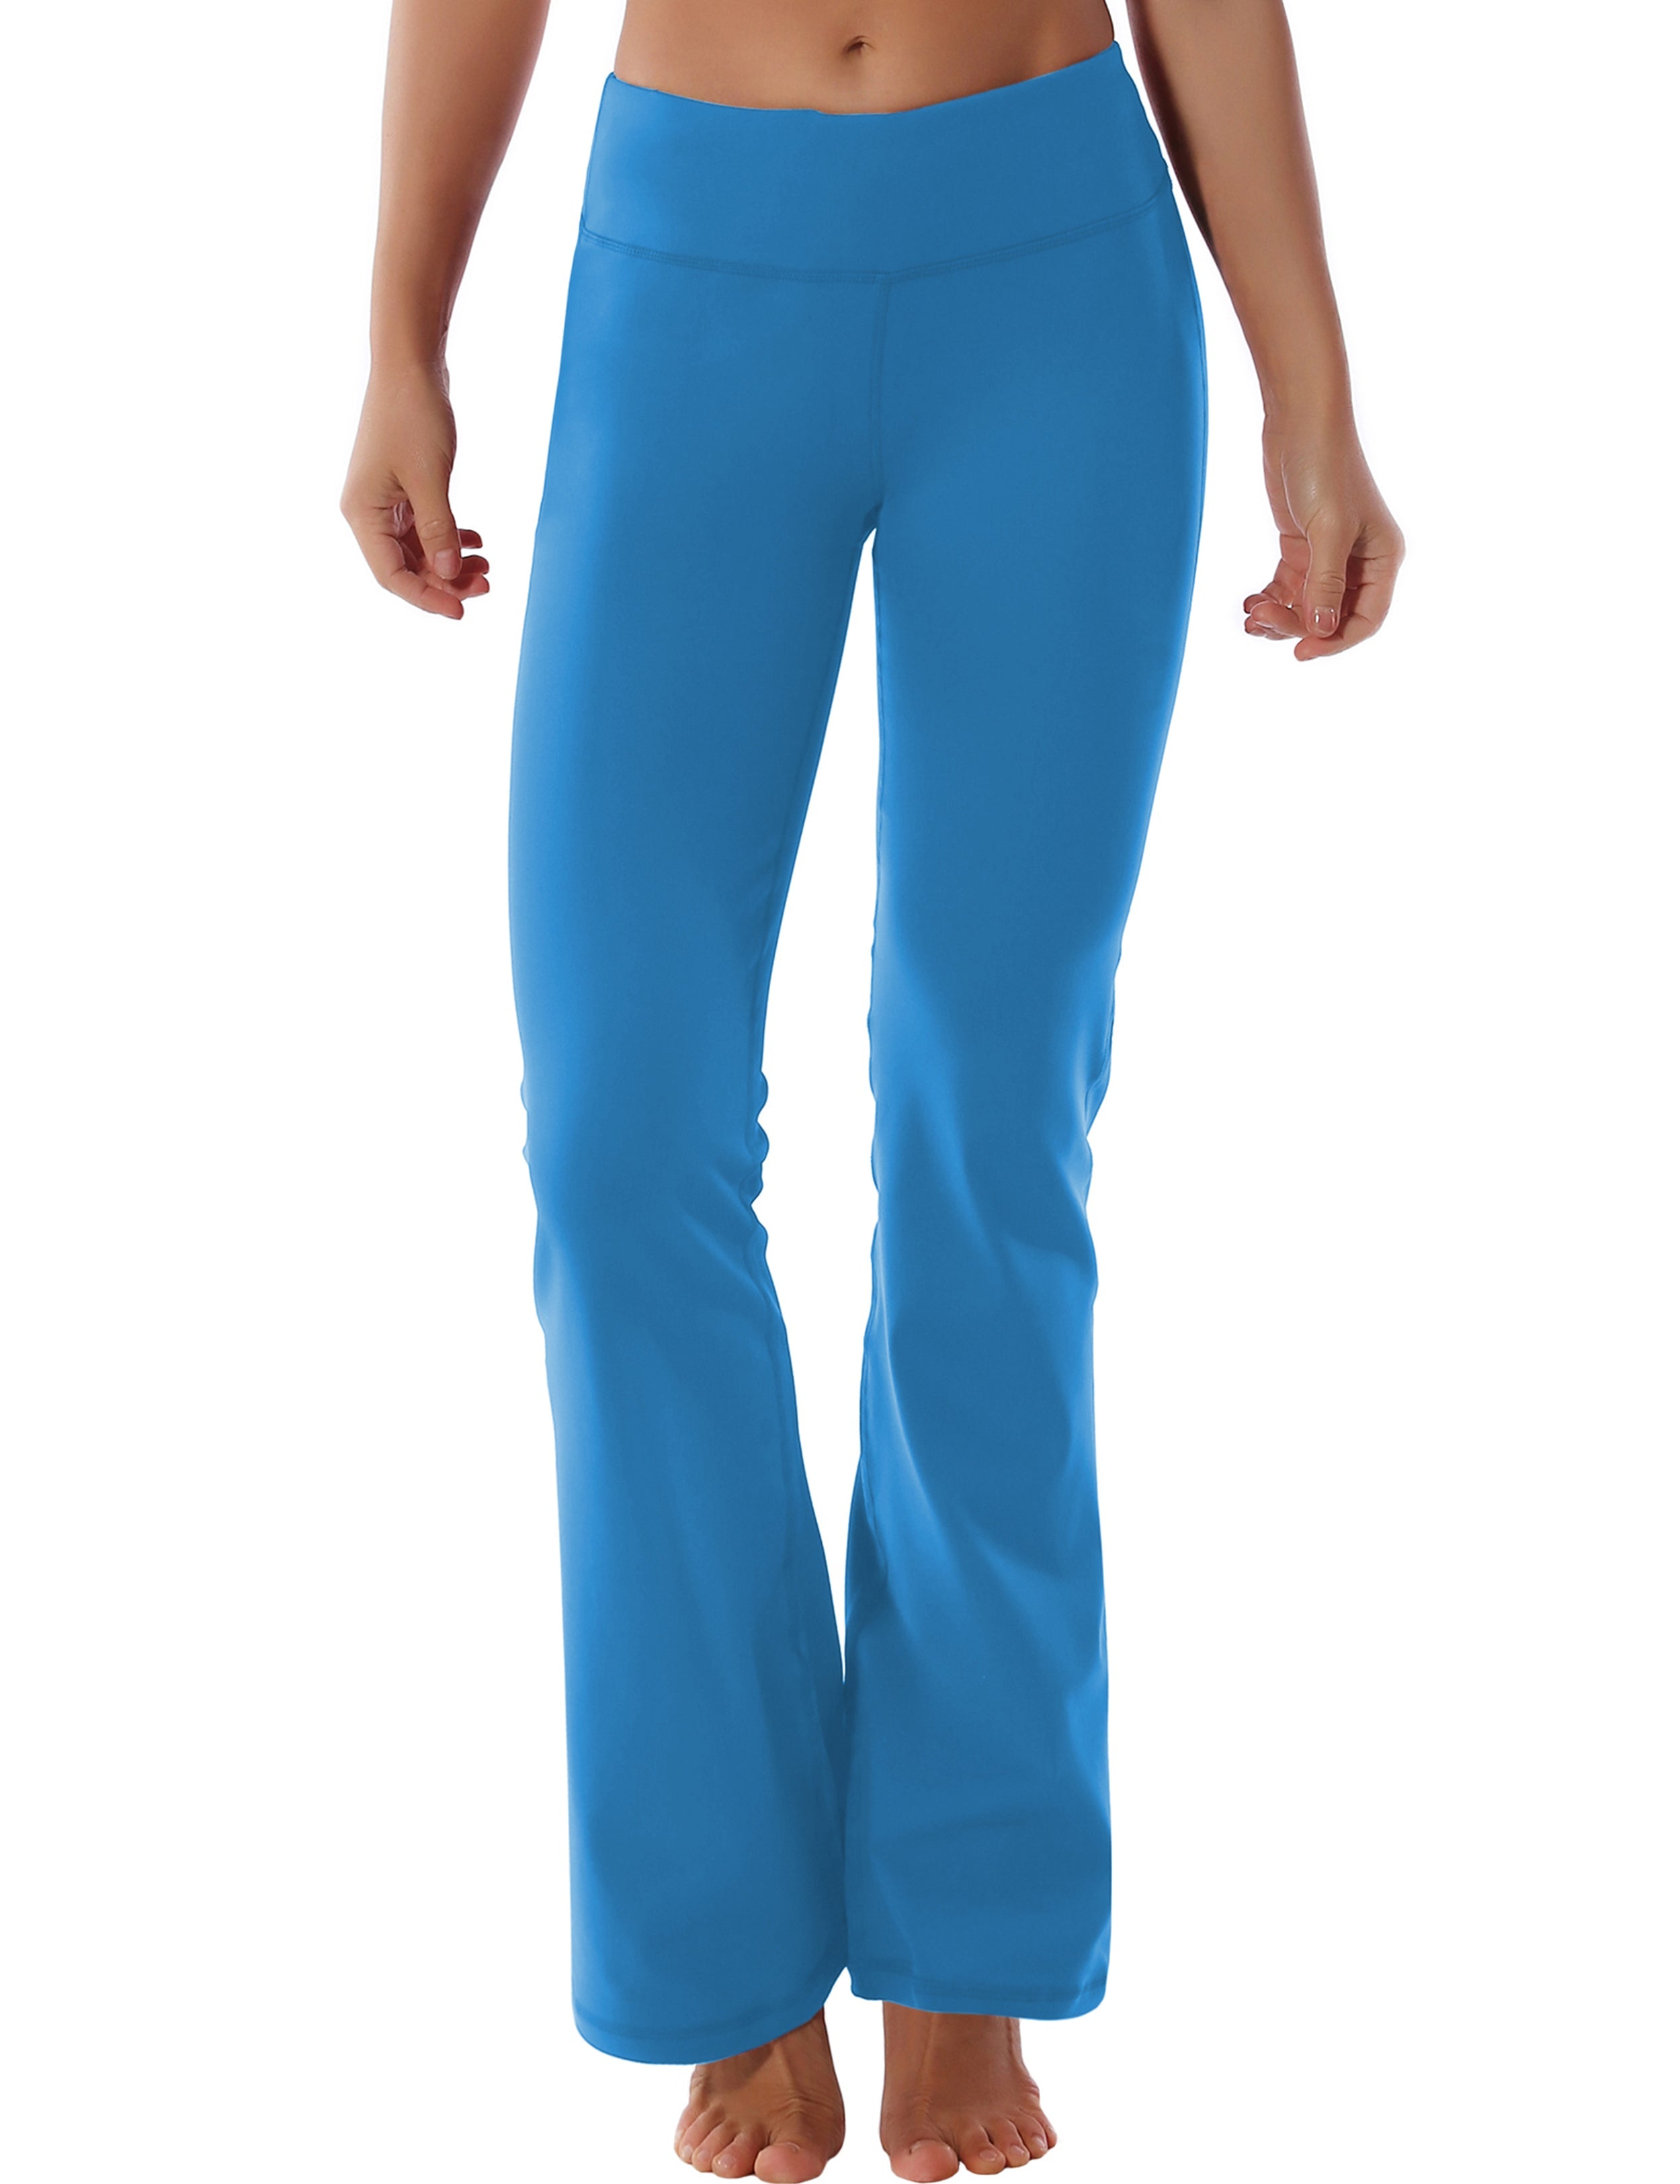 Cotton Nylon Bootcut Leggings peacockblue 87%Nylon/13%Spandex (Super soft, cotton feel , 280gsm) Fabric doesn't attract lint easily 4-way stretch No see-through Moisture-wicking Inner pocket Four lengths